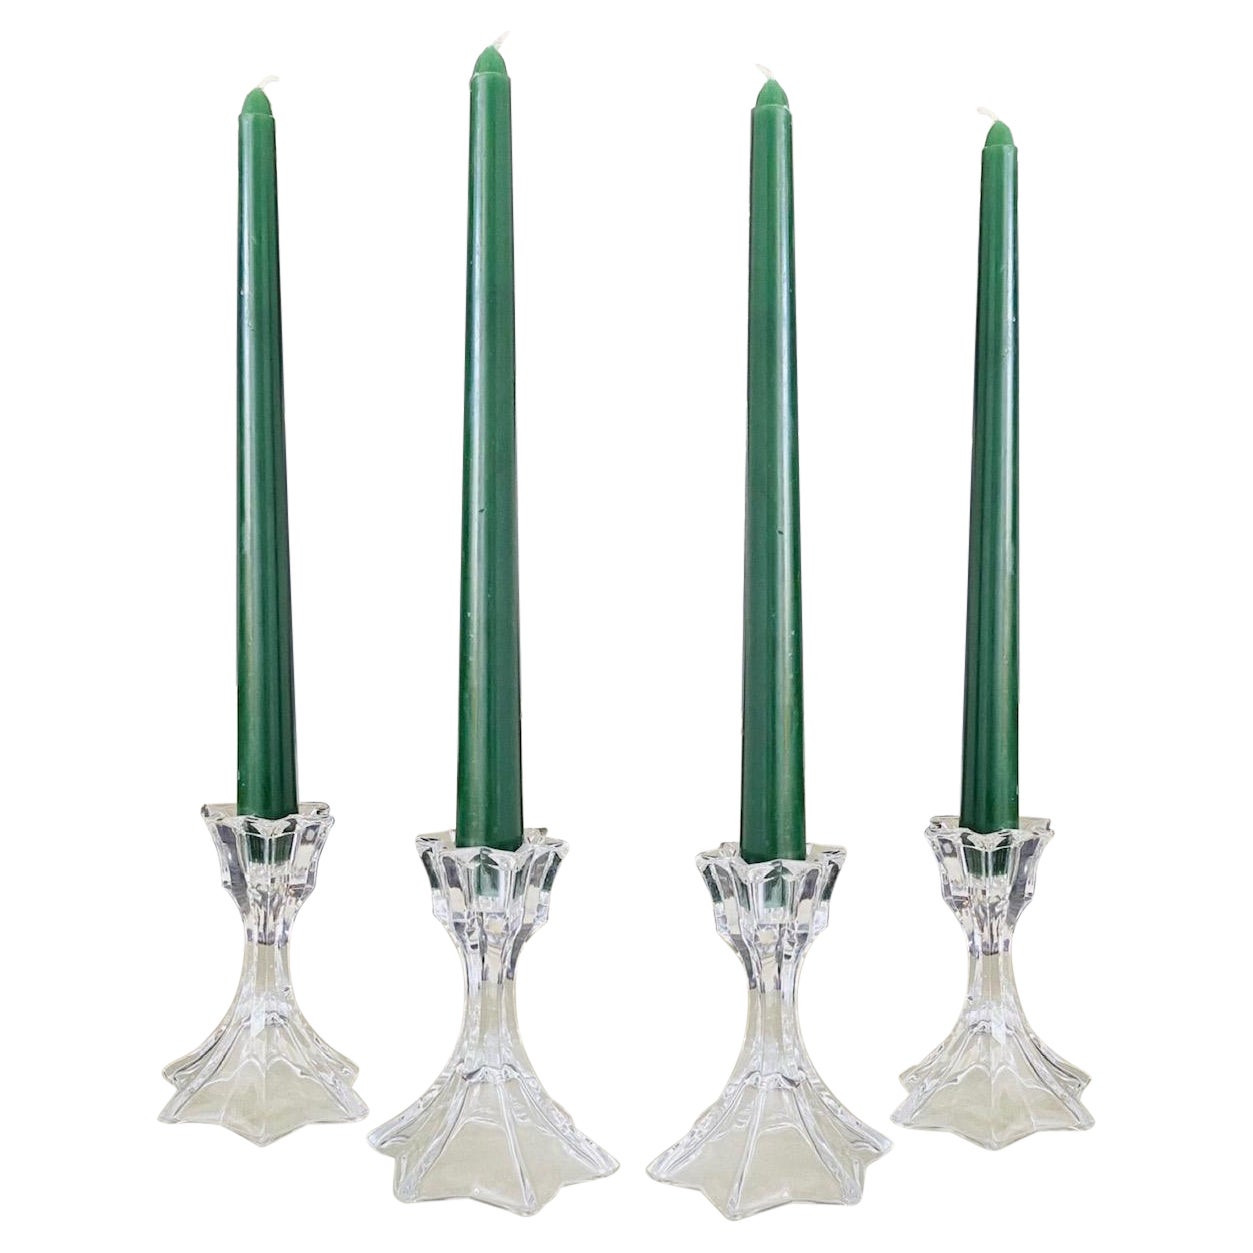 Set of Four Faceted Crystal Candleholders, circa 1970s